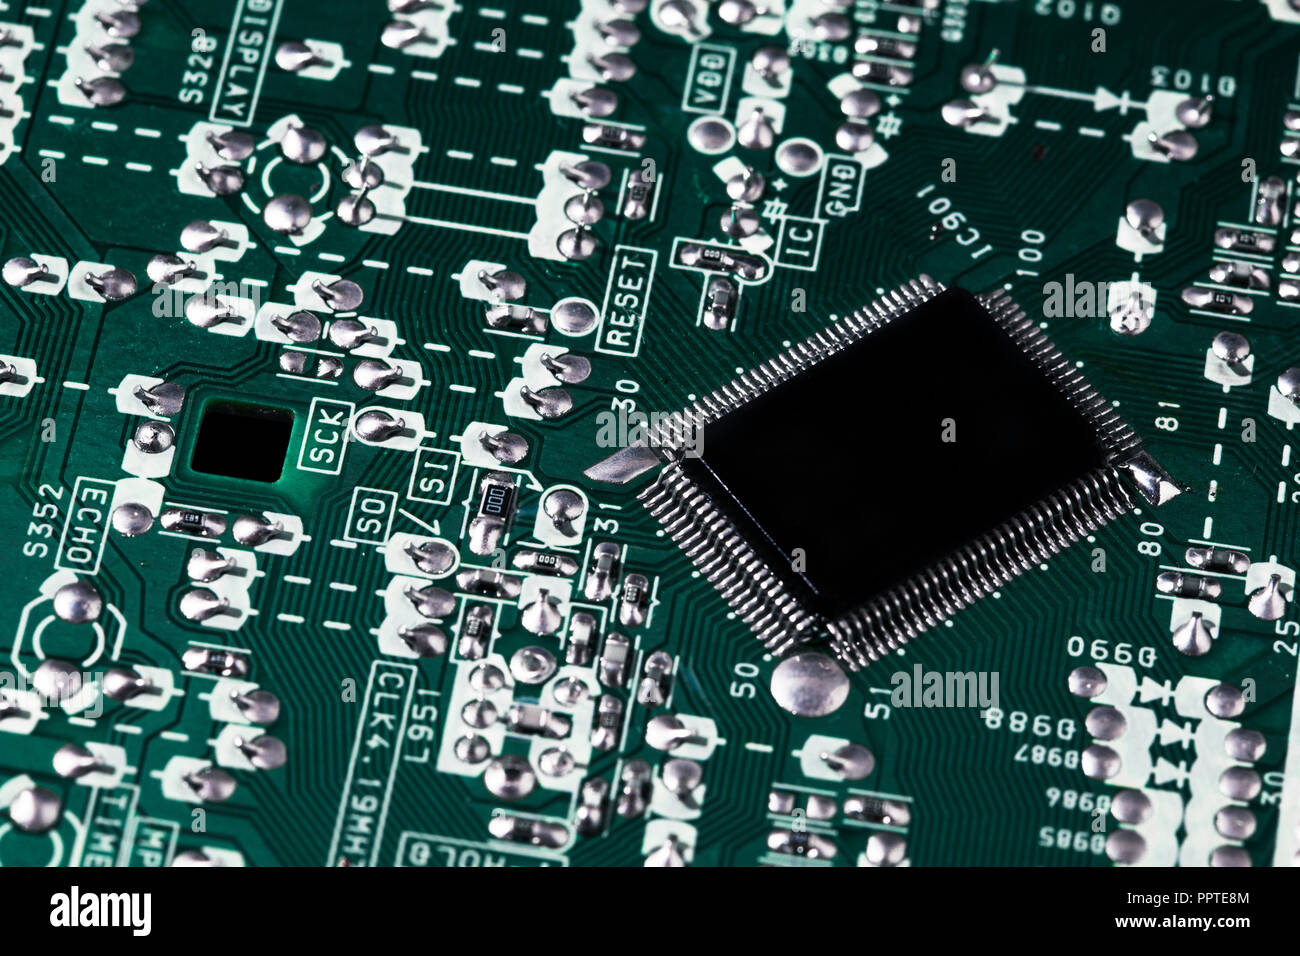 Microchip integrated on motherboard computer science Stock Photo